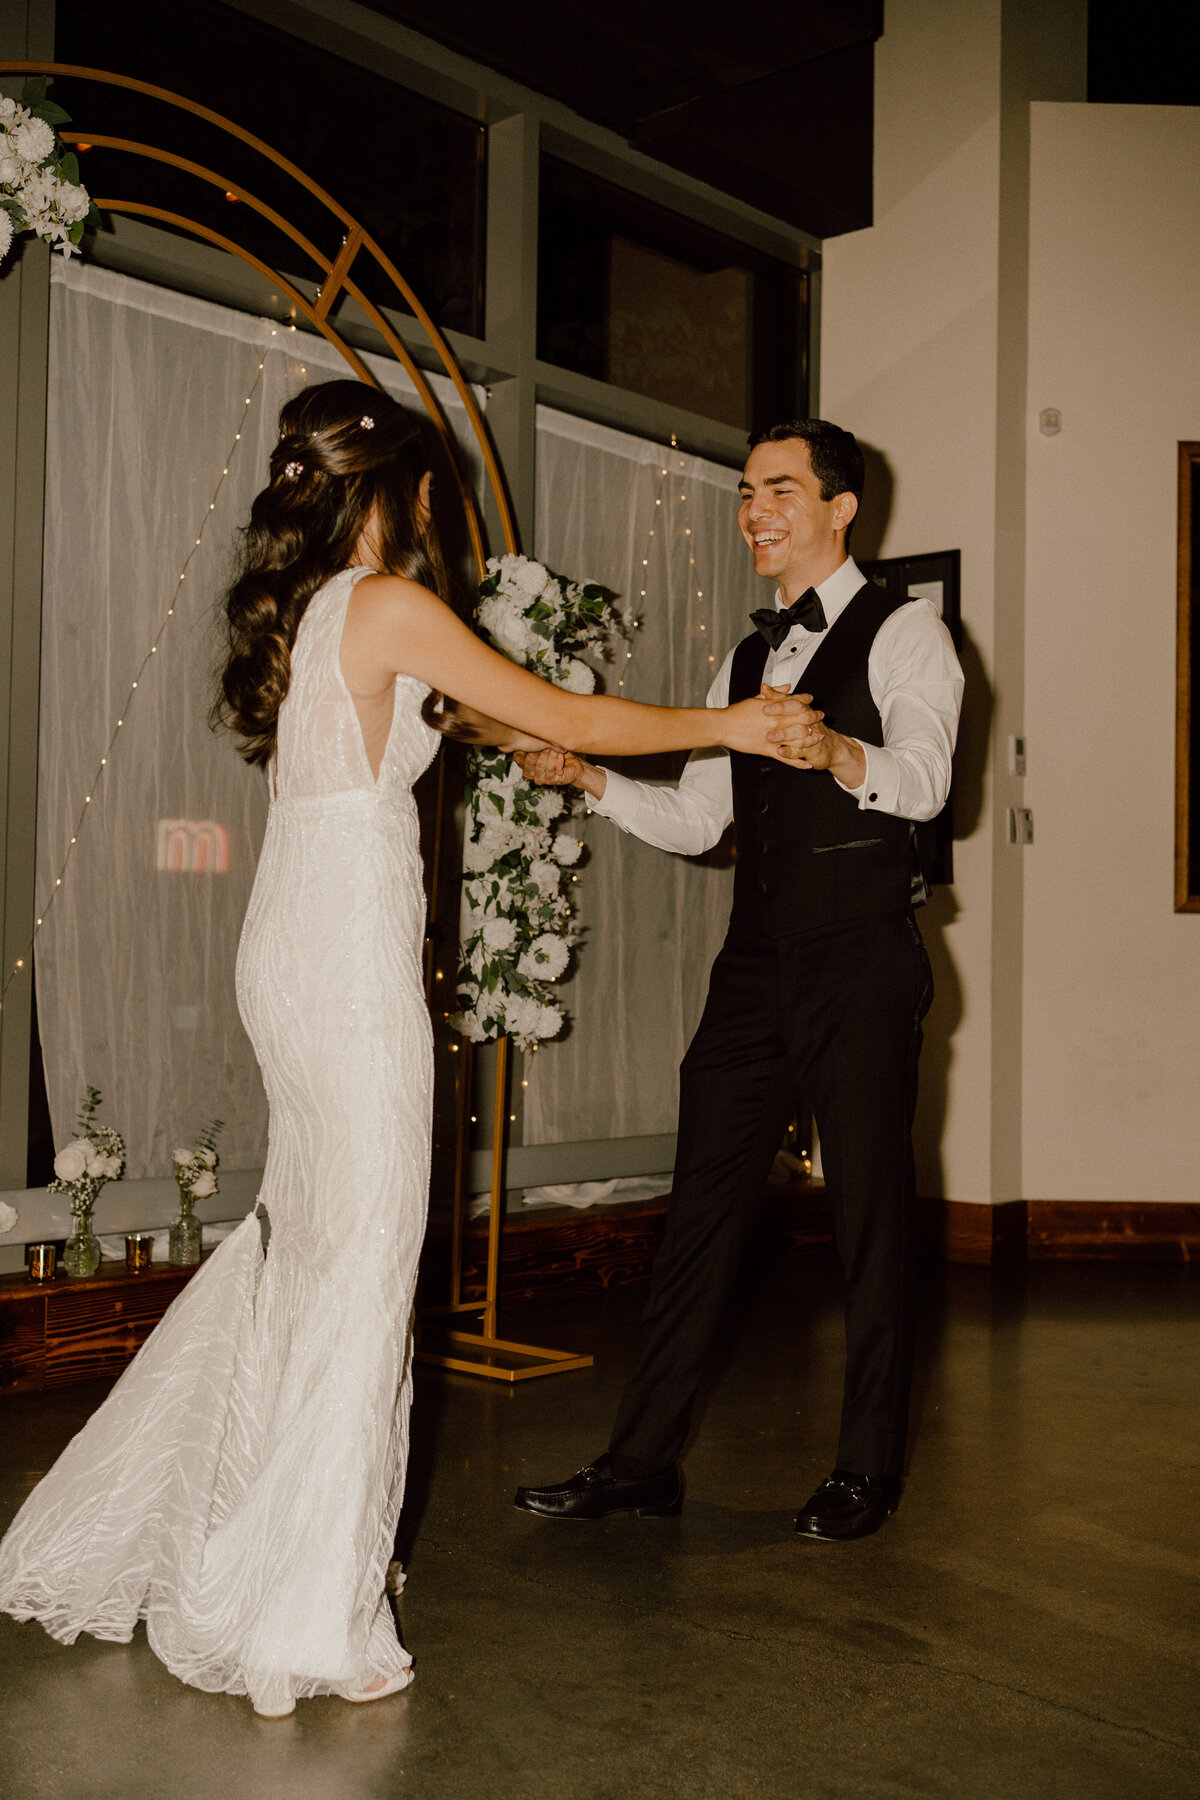 Bride and groom share a joyful dance at their wedding reception, with the bride in a stunning fitted lace gown and the groom in a stylish black tuxedo and vest. They dance in front of a beautifully decorated arch adorned with white flowers and twinkling lights, capturing a candid moment of happiness and celebration.